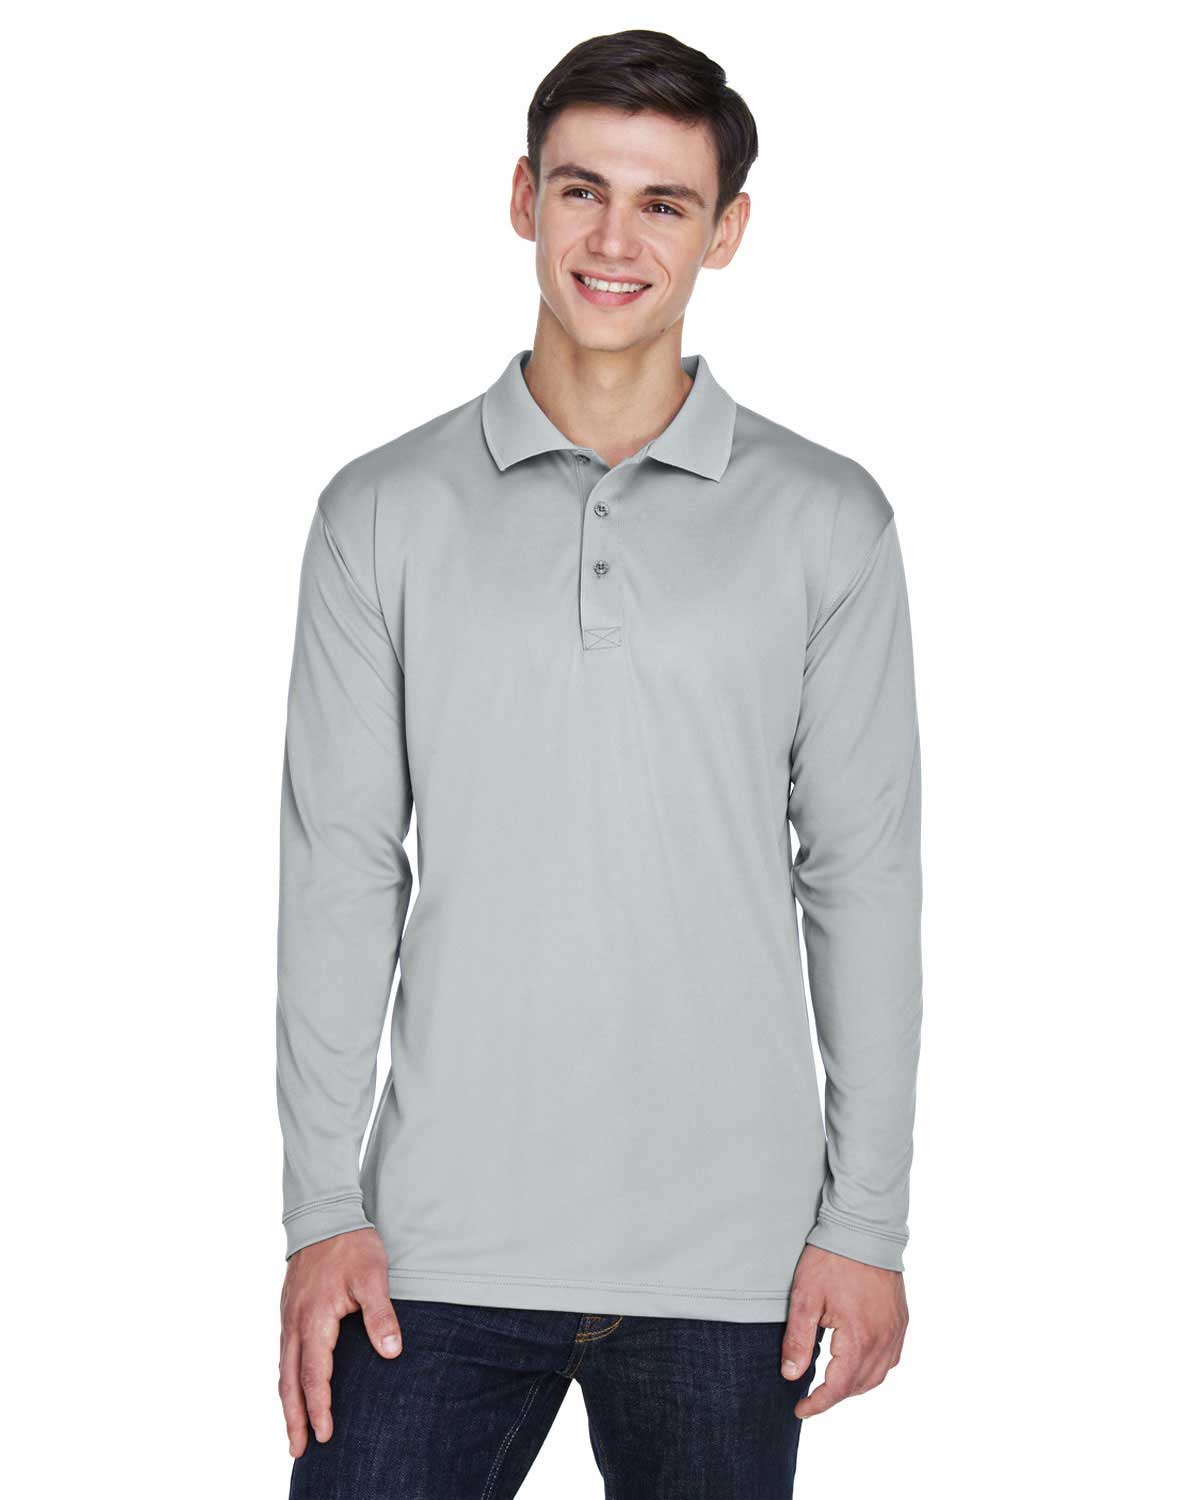 Ultraclub 8405LS Men Cool & Dry Sport Long-Sleeve Polo at Apparelstation